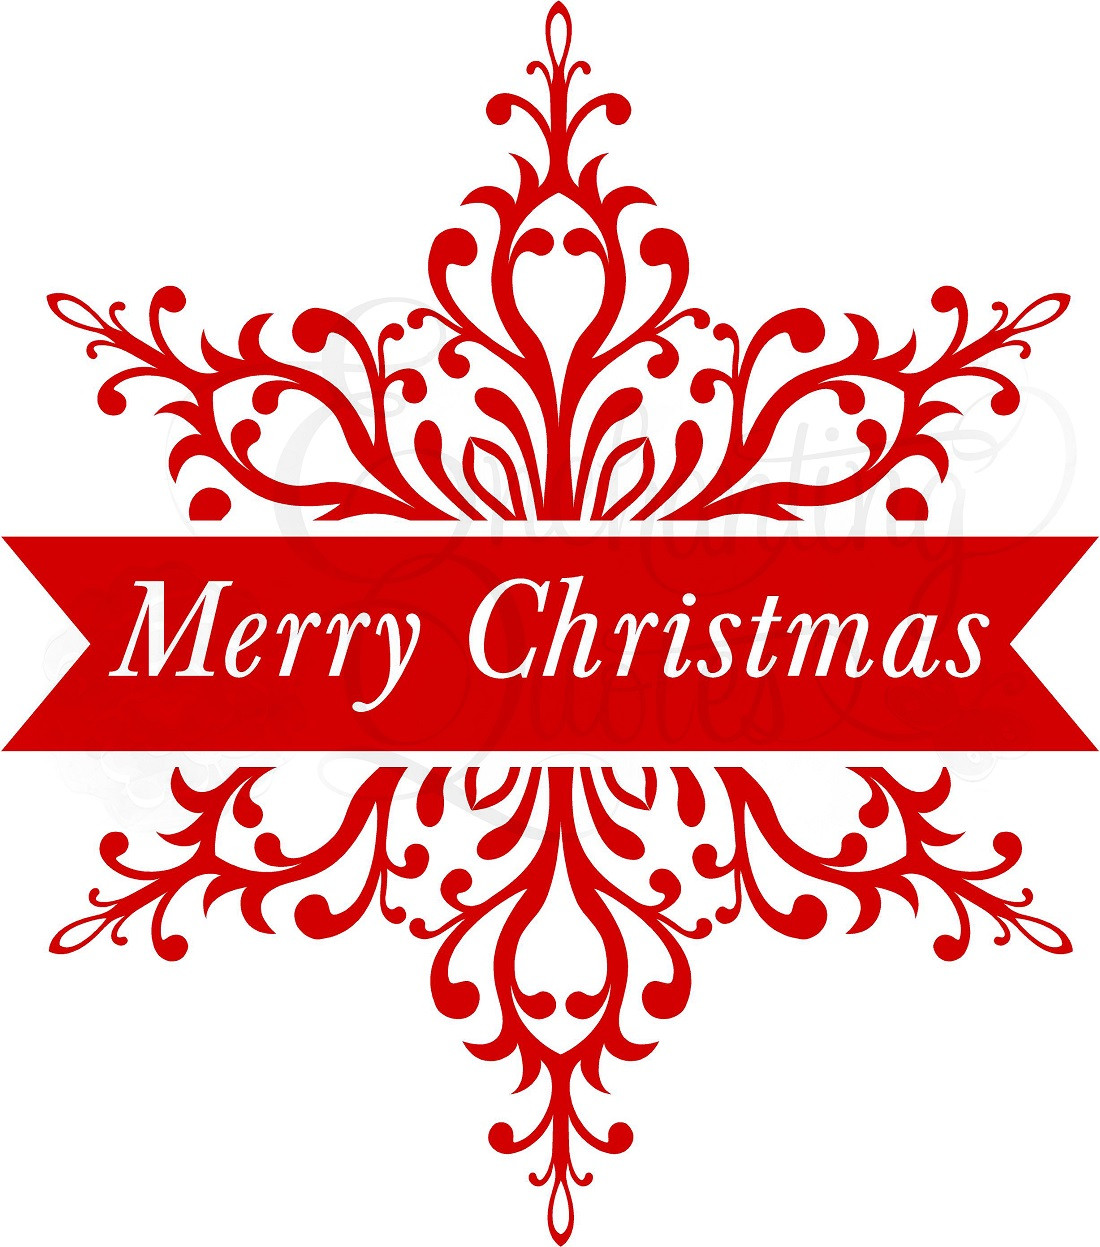 Merry Christmas Images And Quotes
 Merry Christmas Quotes QuotesGram